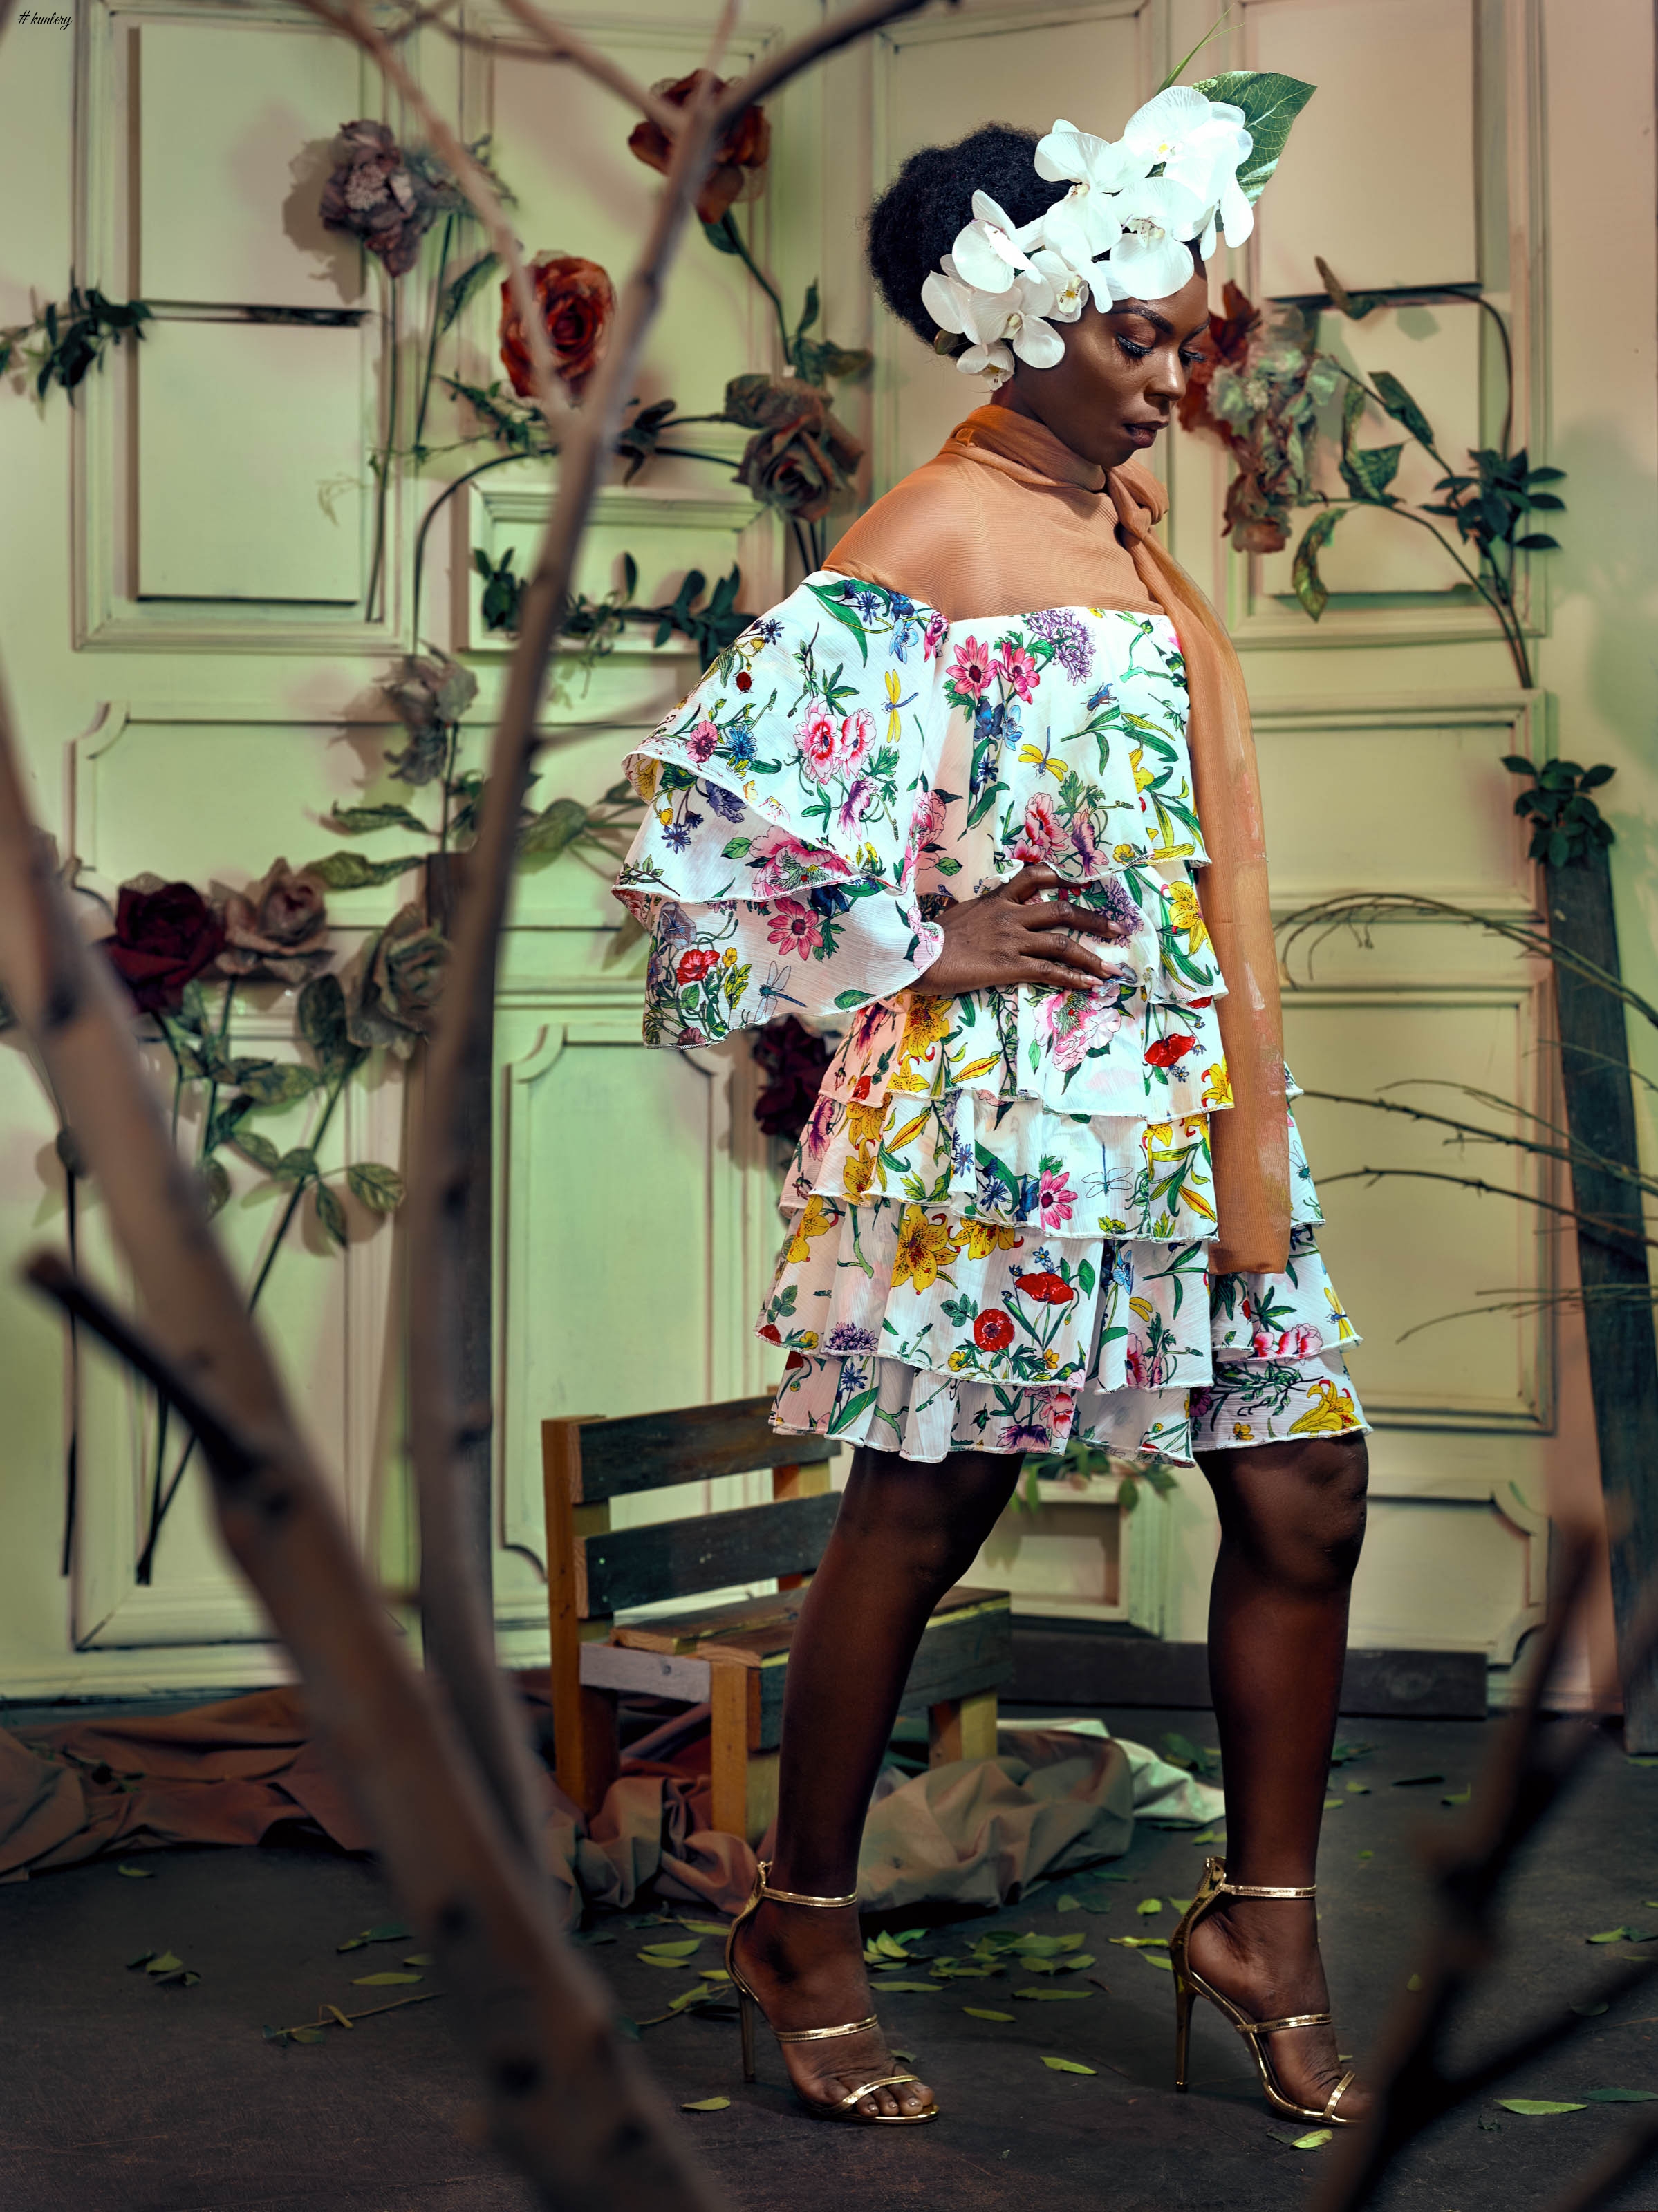 Inspired By Flowers, Roses and Colours: Nouva Couture Presents “Floraison” Collection